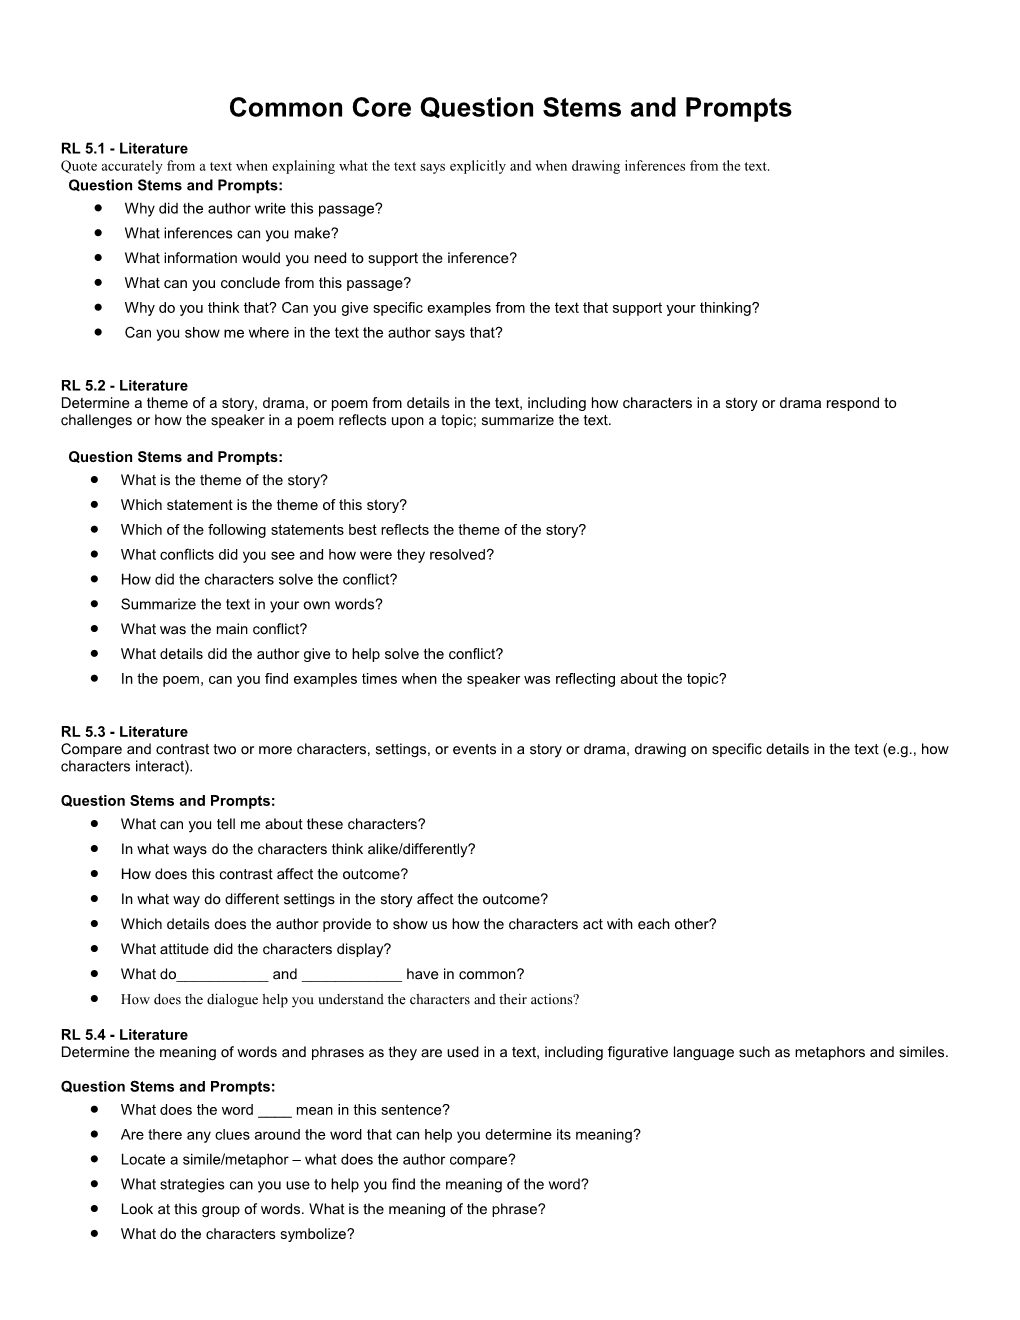 Common Core Question Stems and Prompts